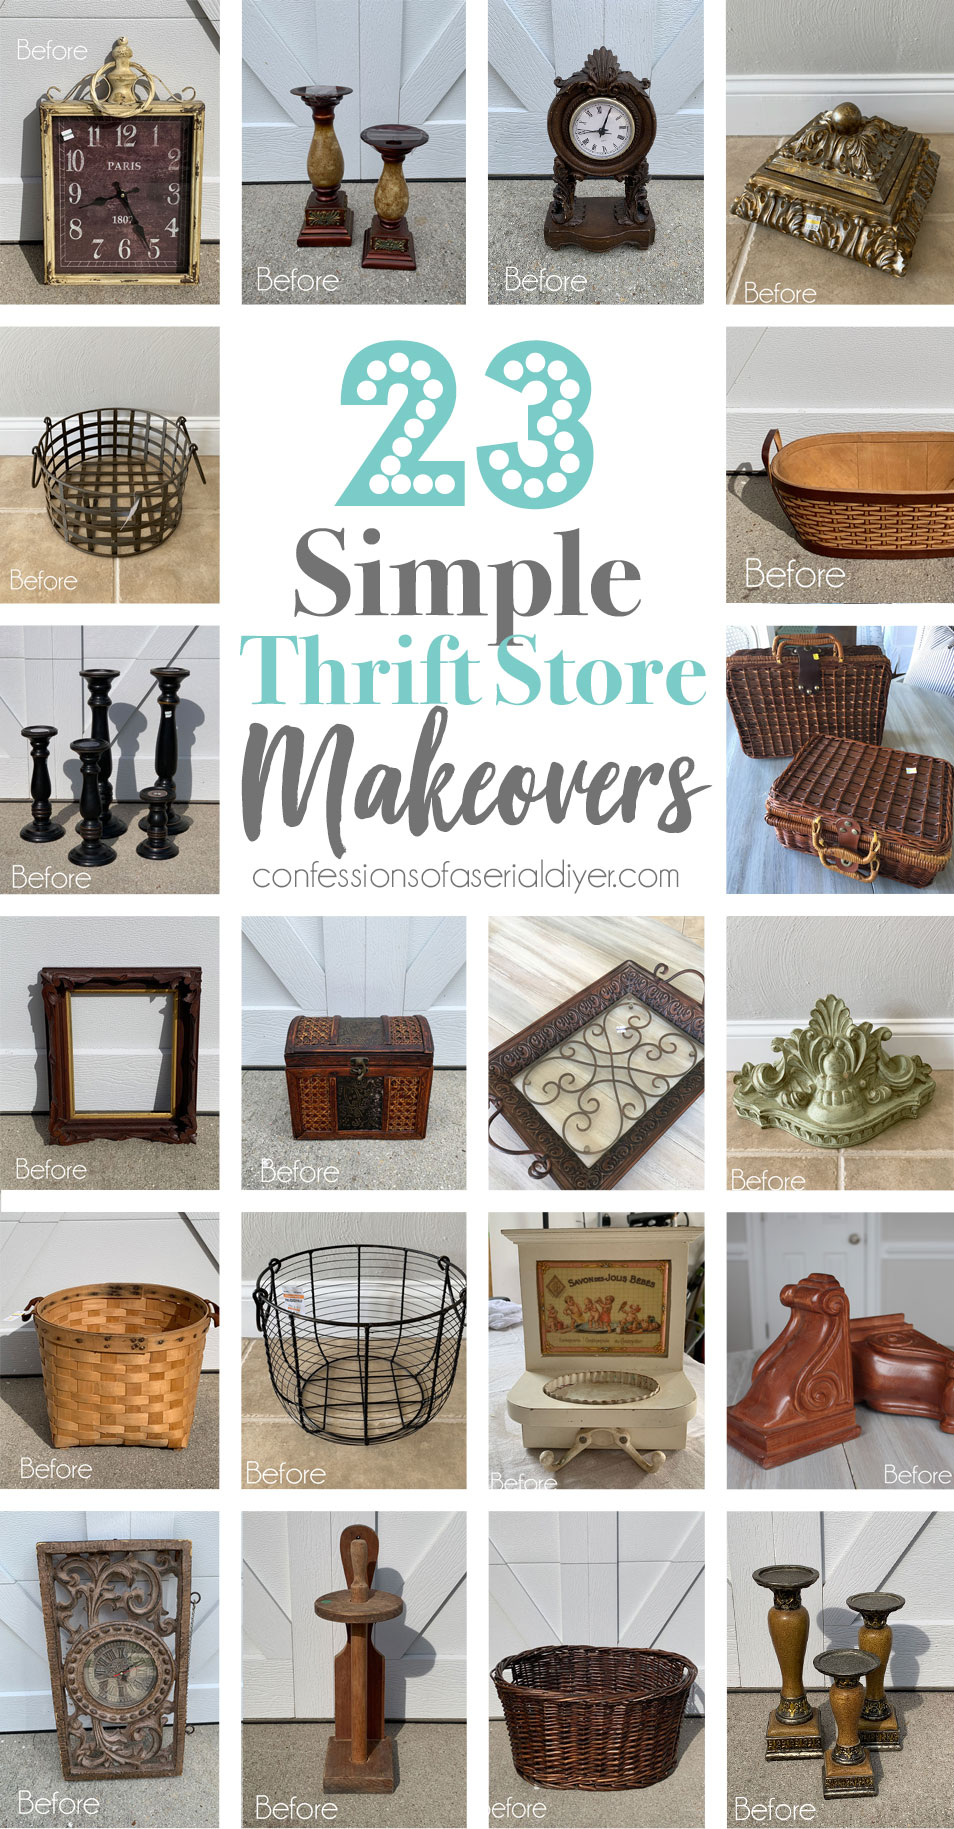 23 simple thirft store makeovers